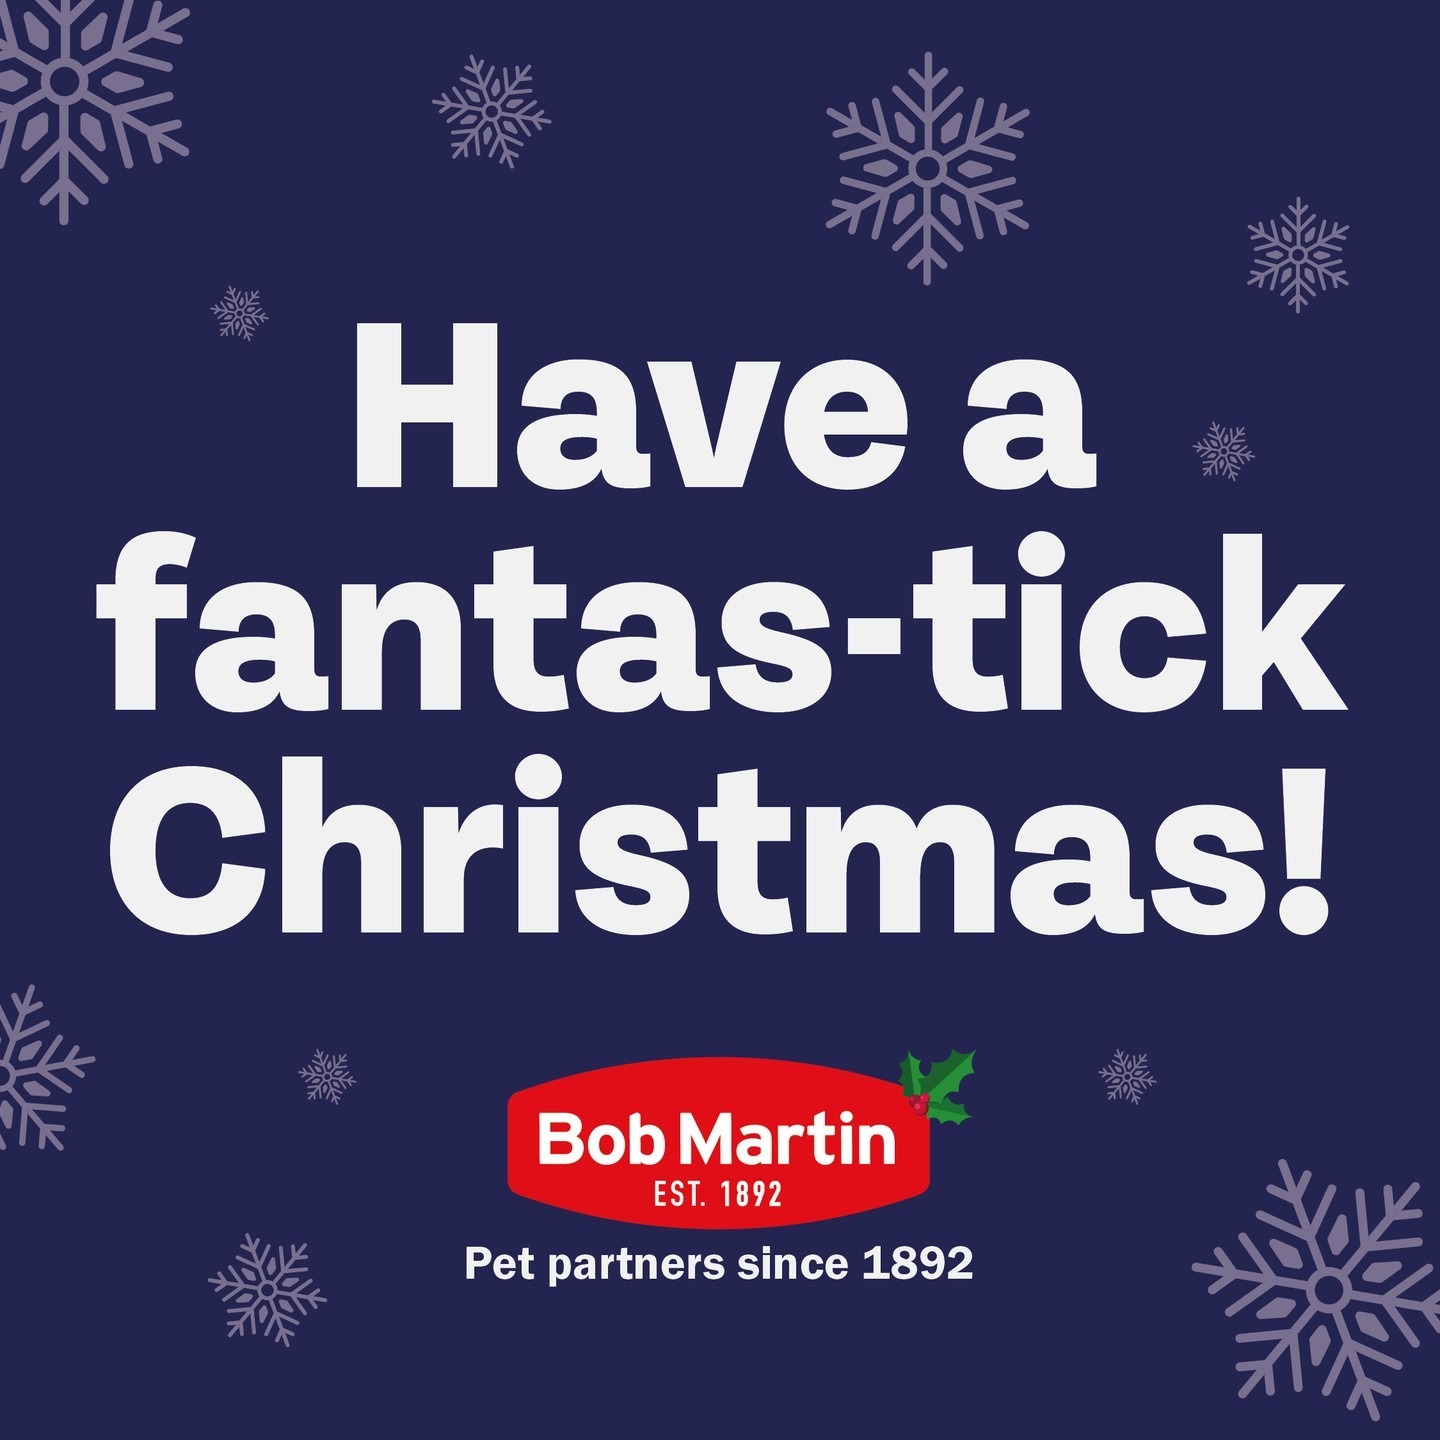 We hope you have the best Christmas ever! Our team will be taking a break over the Christmas holiday, but all messages will be replied to upon our return on 4th January.

If you are worried about your pet’s health during this time, please do not hesitate to contact a veterinary professional.

 #BobMartin #PetHealthcare #Flea #Worm #Dog #Cat #SpotOn #Pets #PetsOfInstagram #PetCare #PetTips #PetHealth #HealthyPets #ActivePets